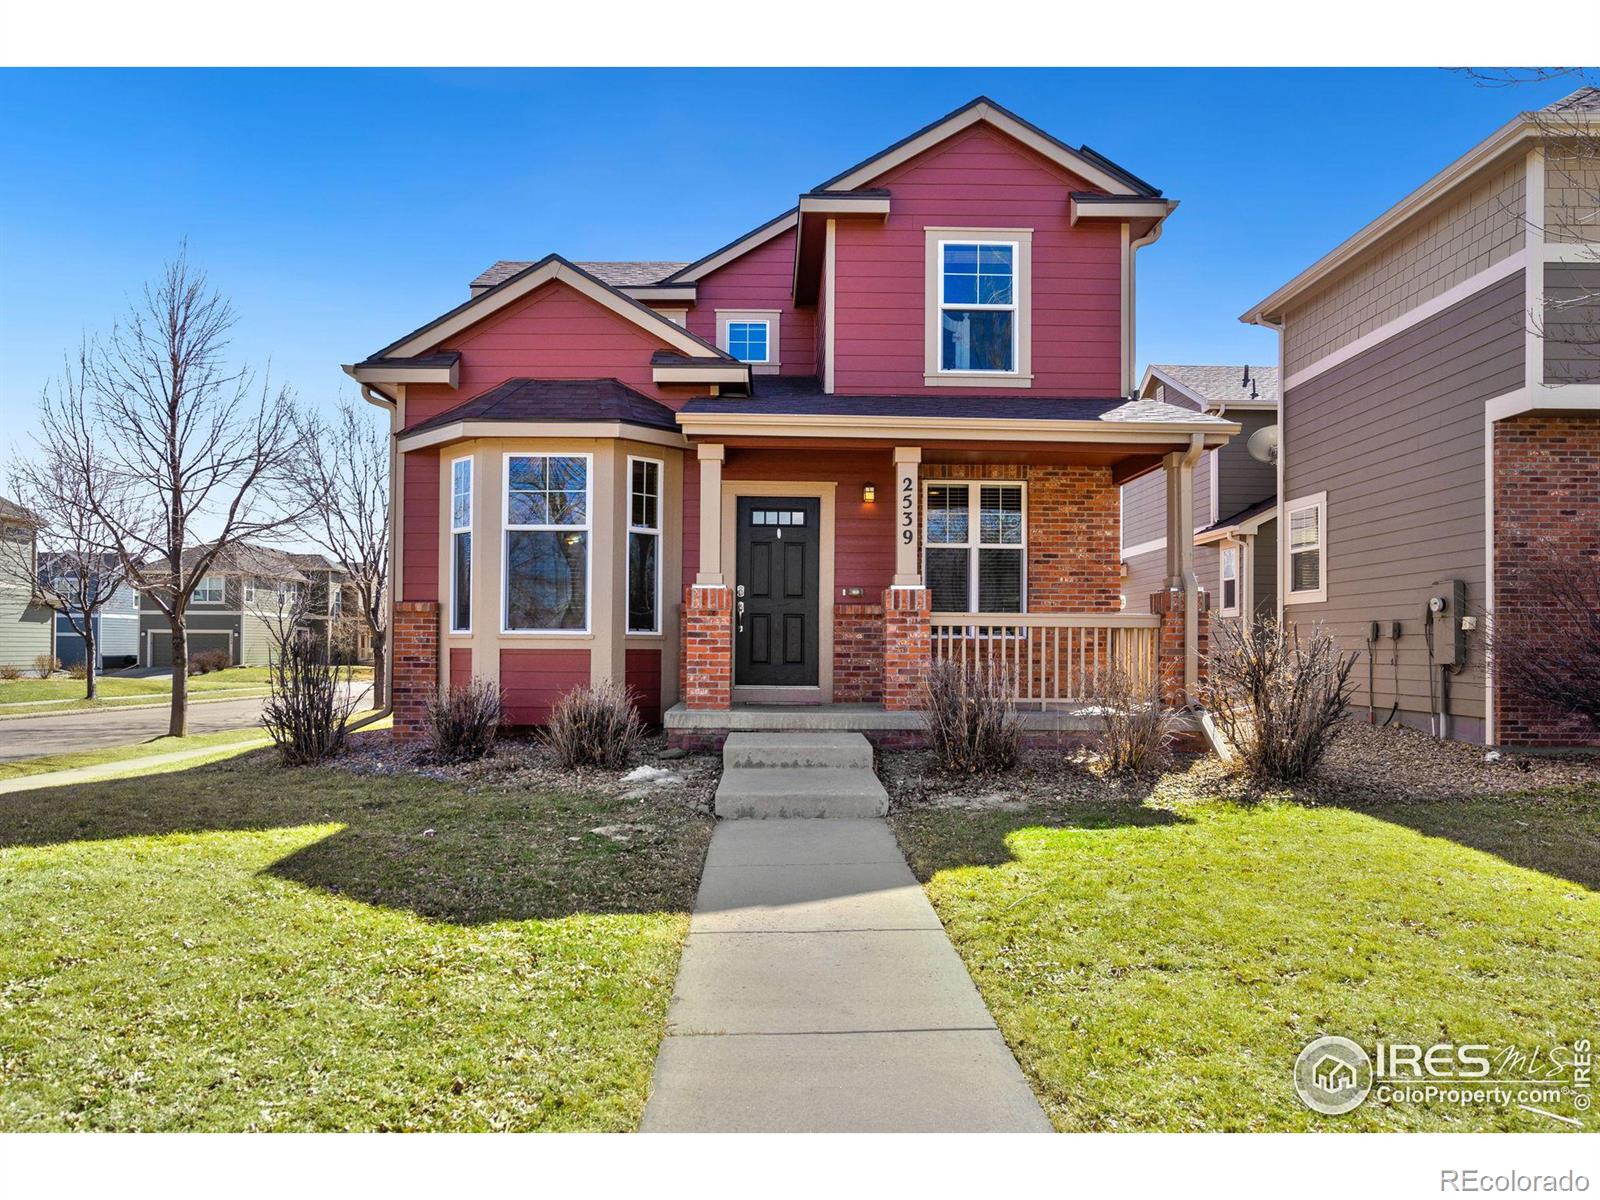 Report Image for 2539  Rock Creek Drive,Fort Collins, Colorado